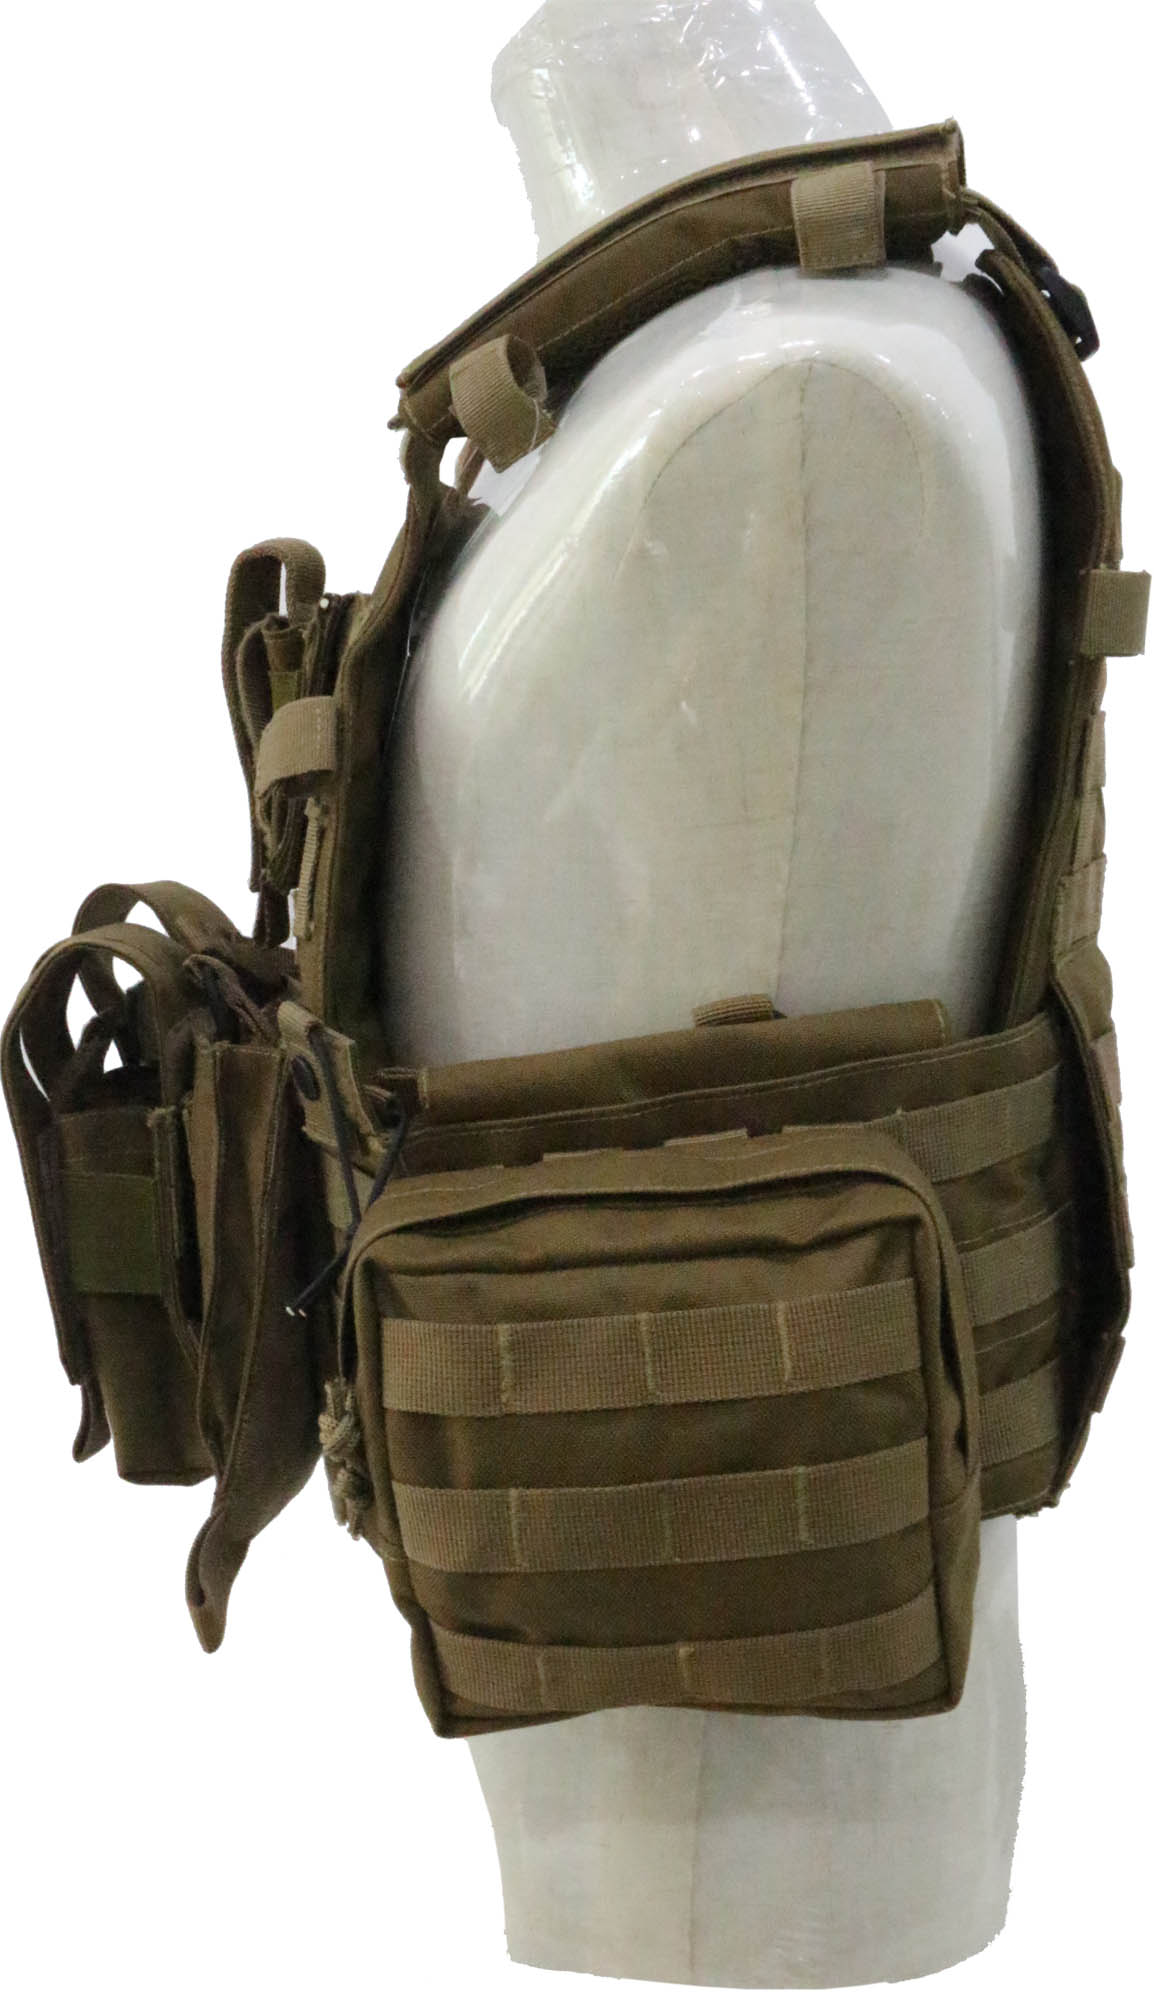 High Quality Military Army /Ballistictactical Bullet Proof Vest